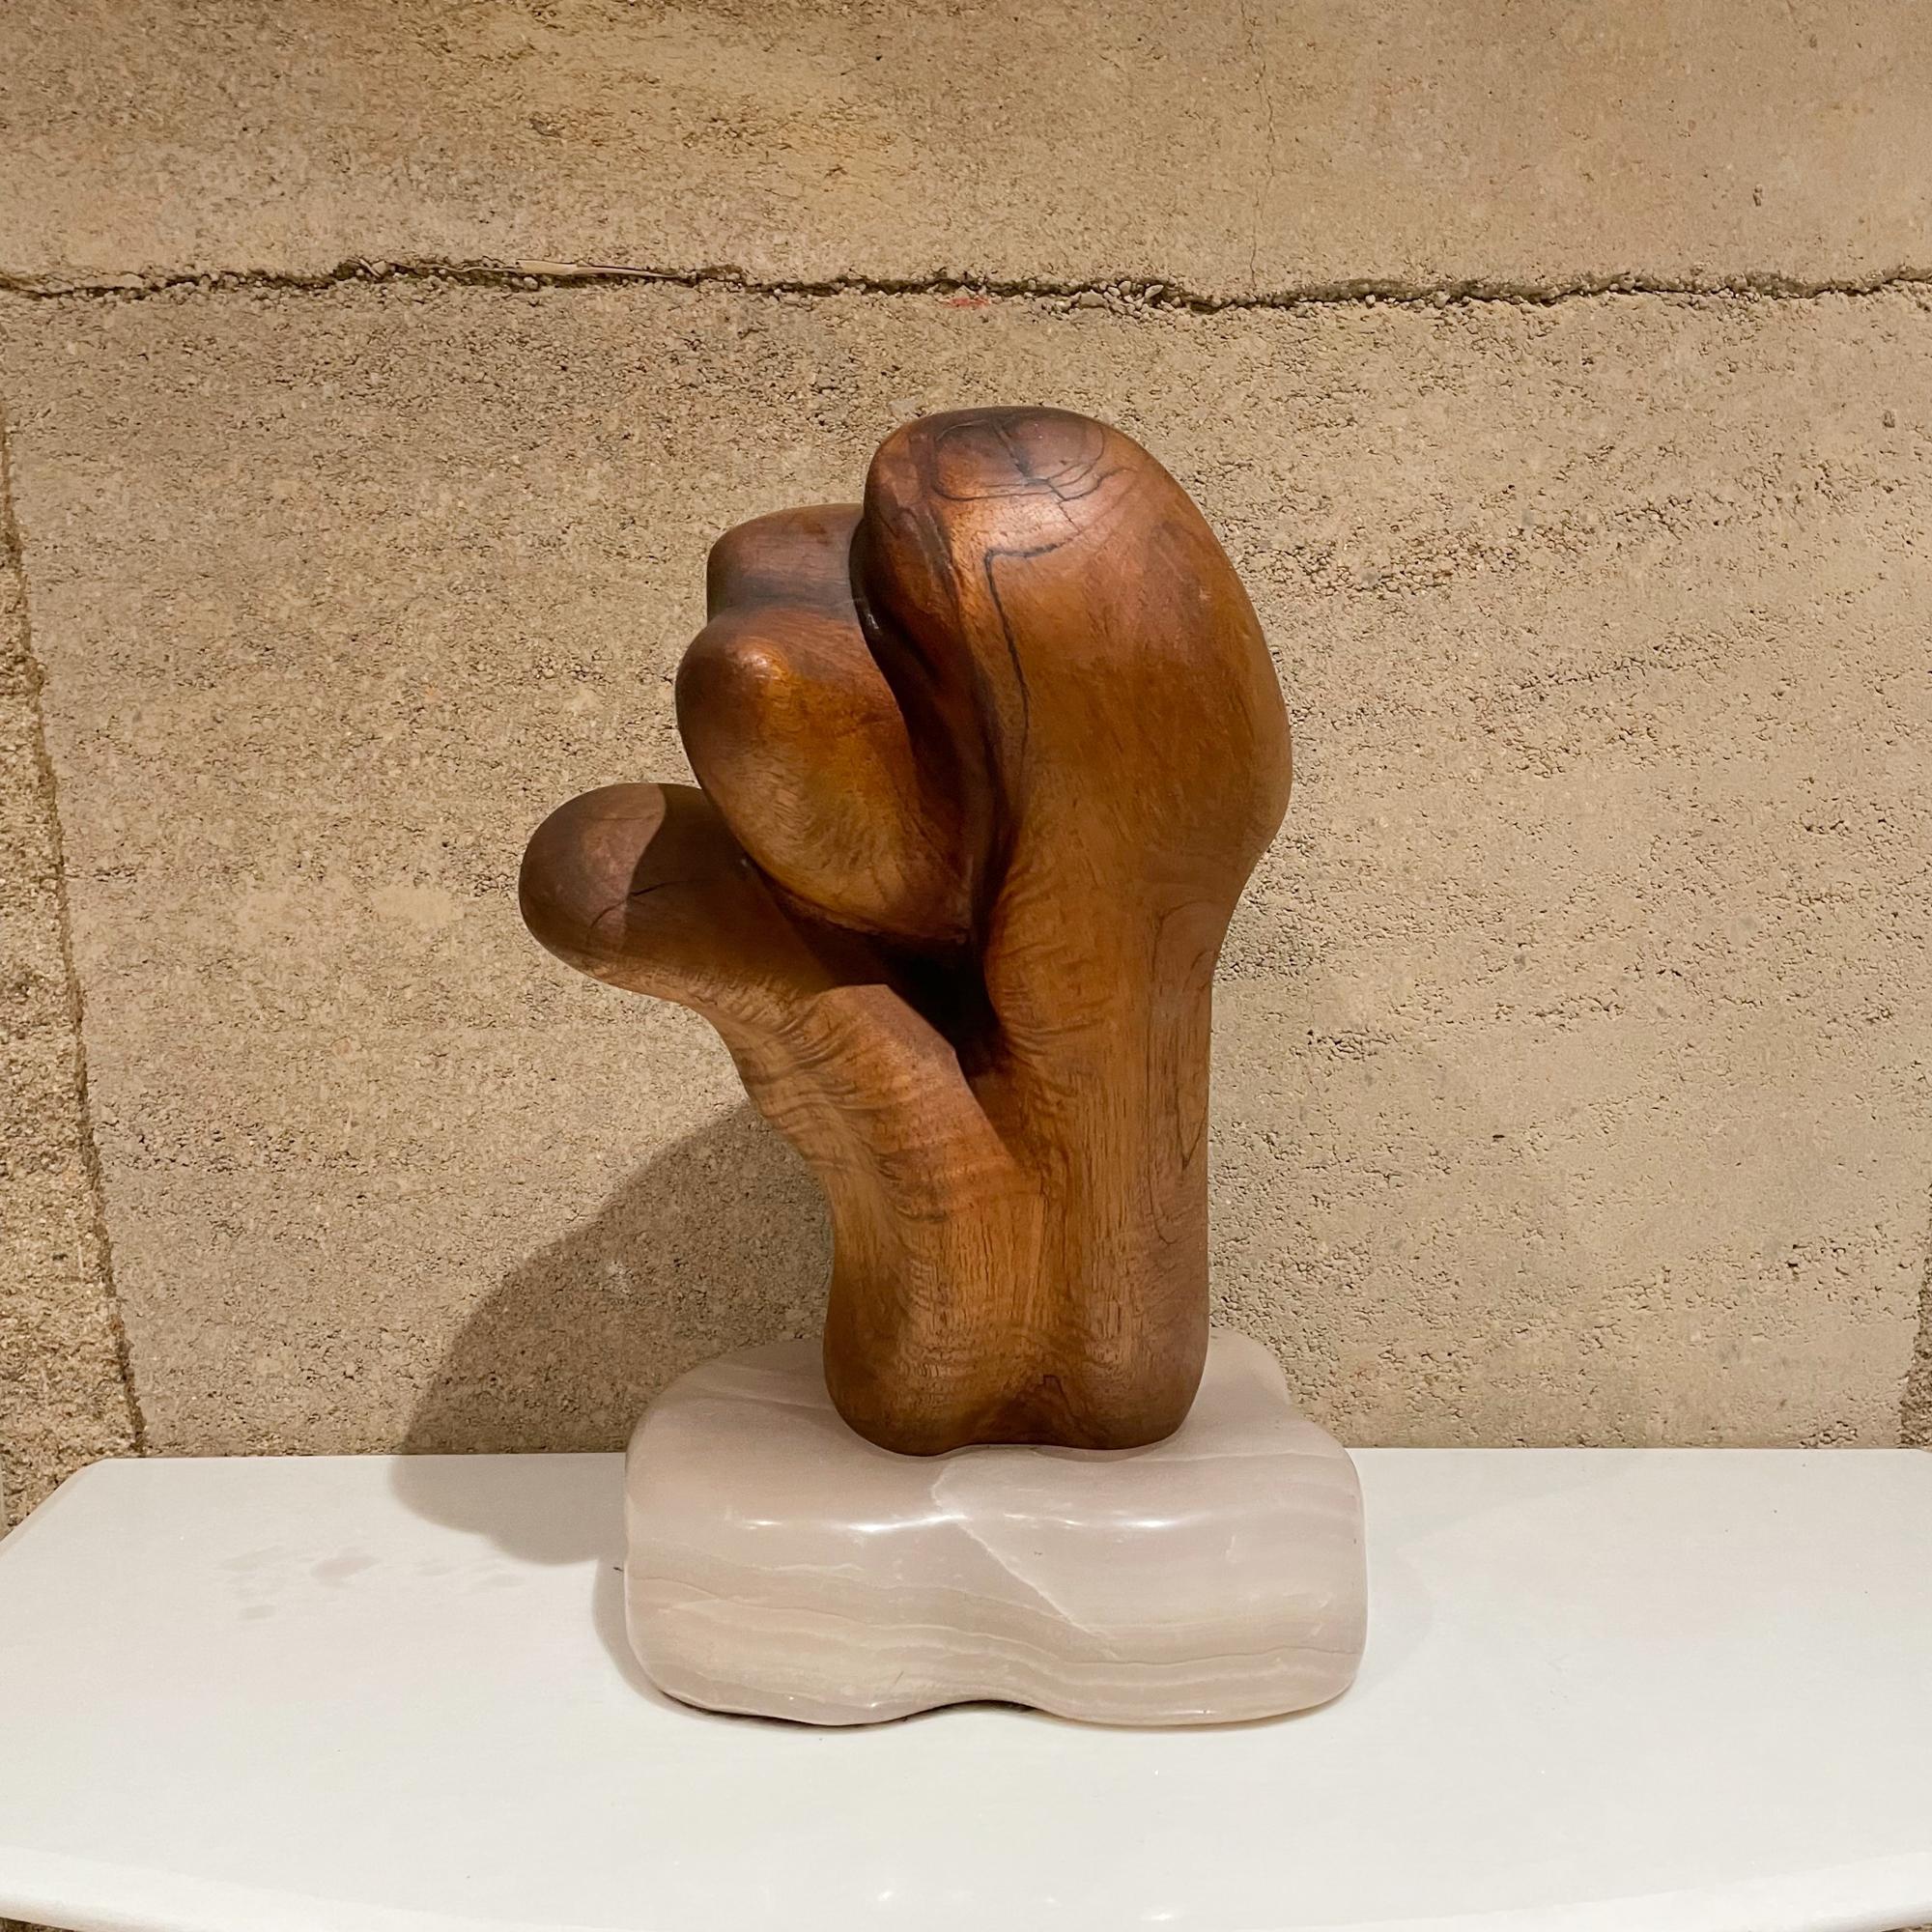 Sculpture
Abstract organic shape exquisite wood grain sculpture mounted on white translucent sculptural stone base
Unsigned. circa 1960s
Measures: 16 tall x 9.75 x 7 d inches 
Original unrestored vintage condition with natural patina.
Please refer